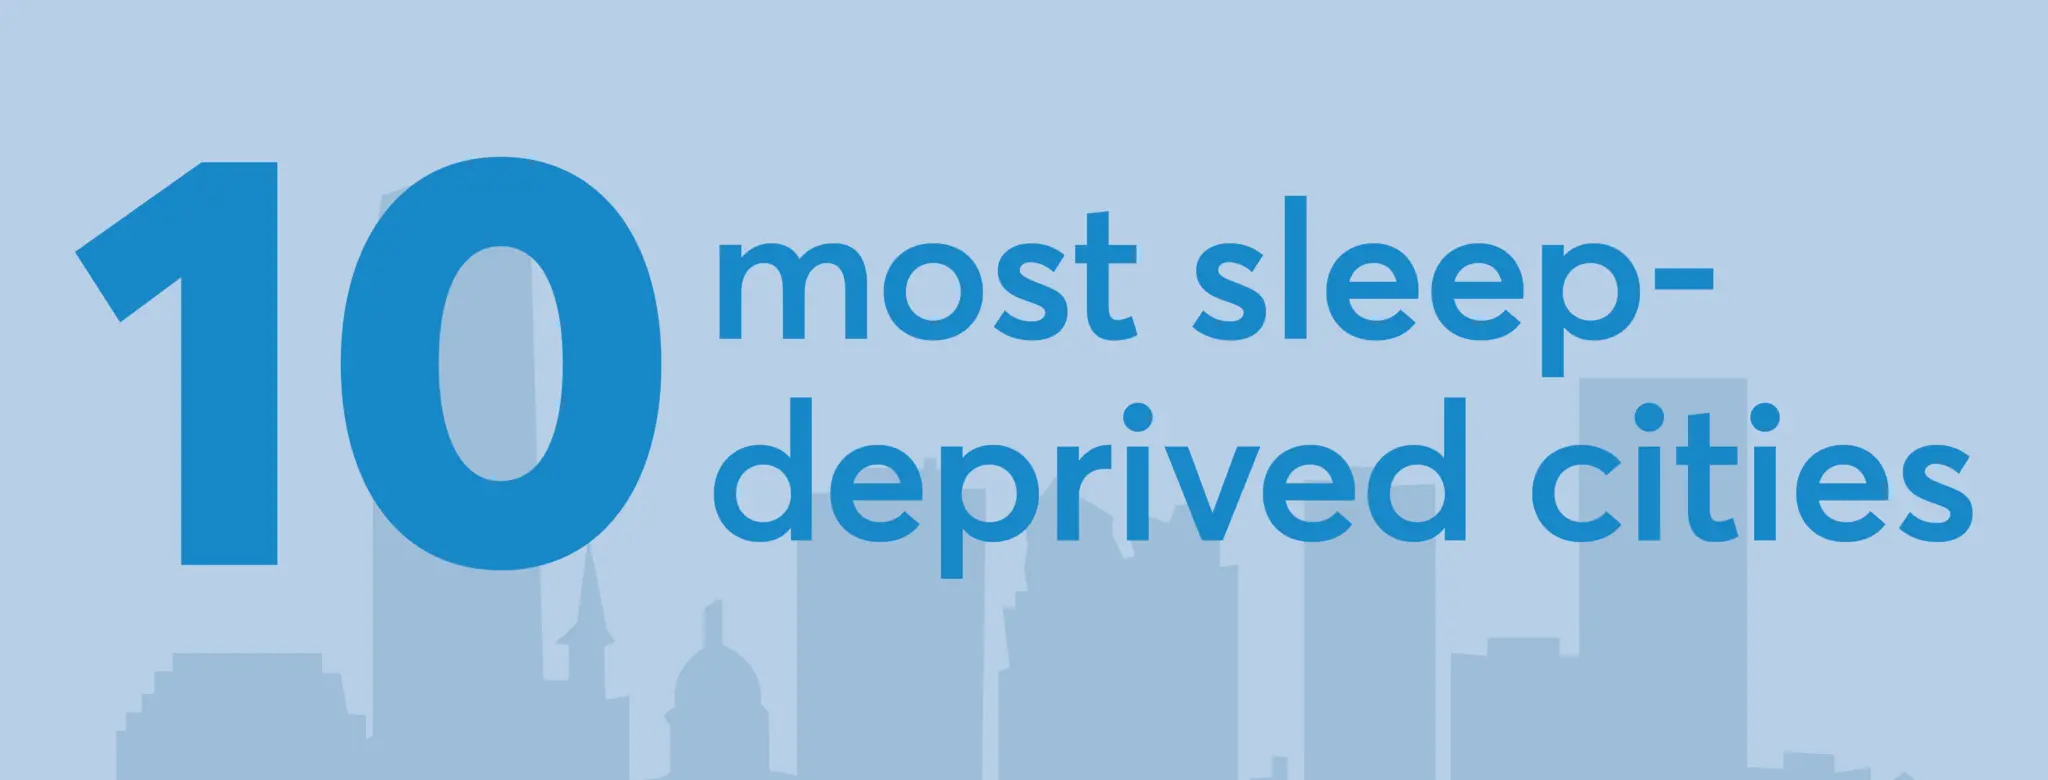 Top 10 most sleep-deprived cities title in front of a blue city skyline